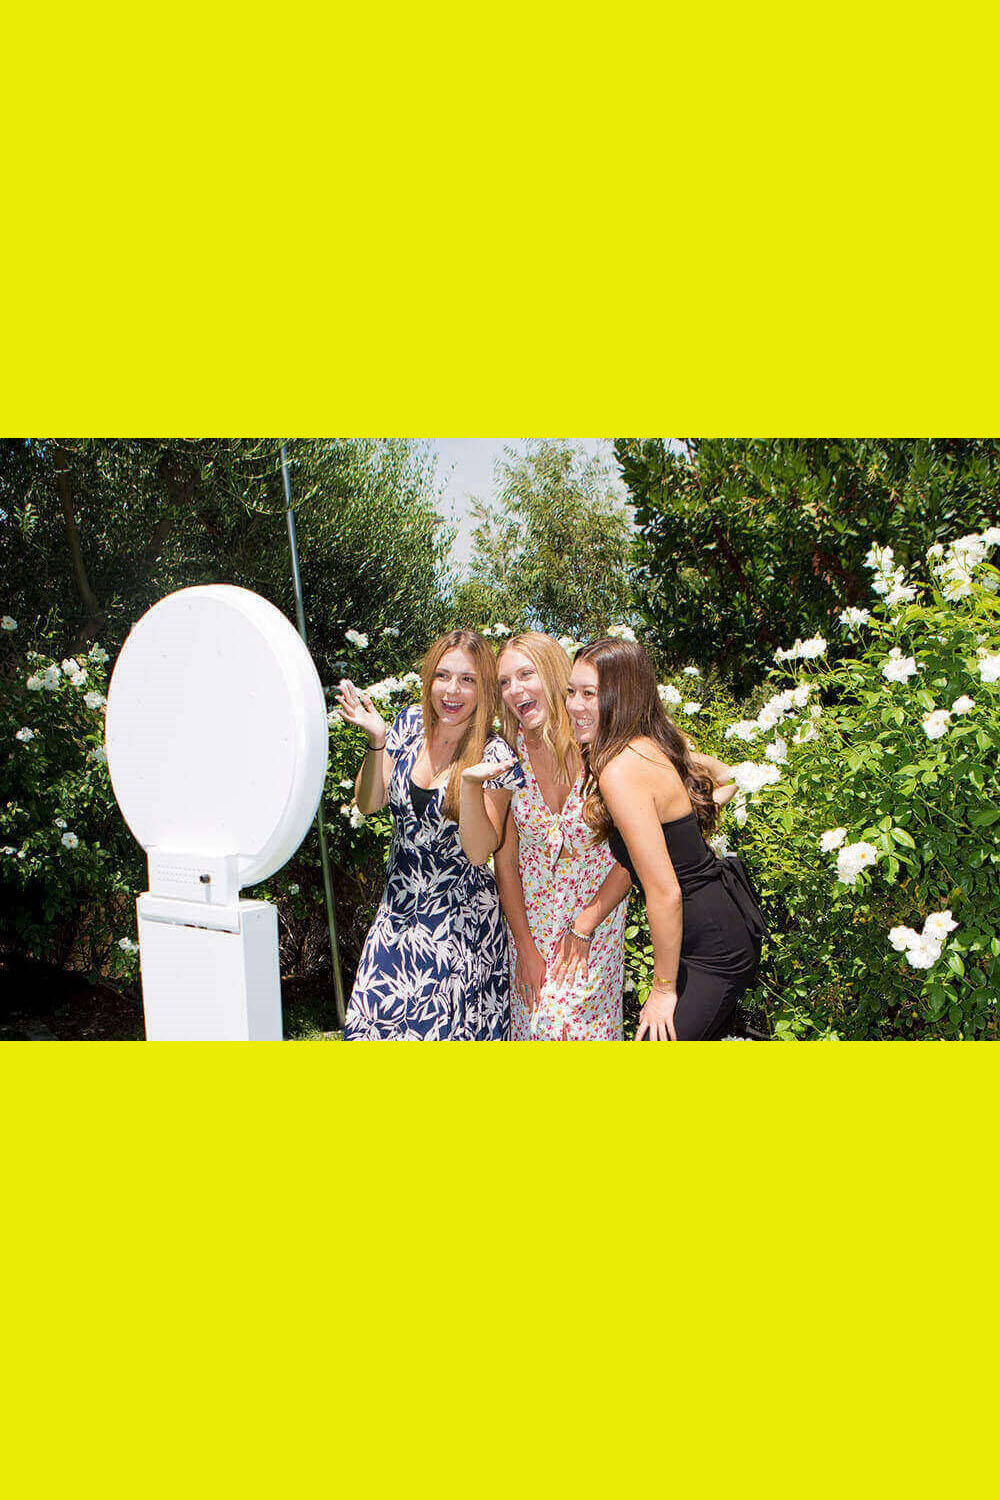 Three girls know how to have fun with this Kern County selfie station.